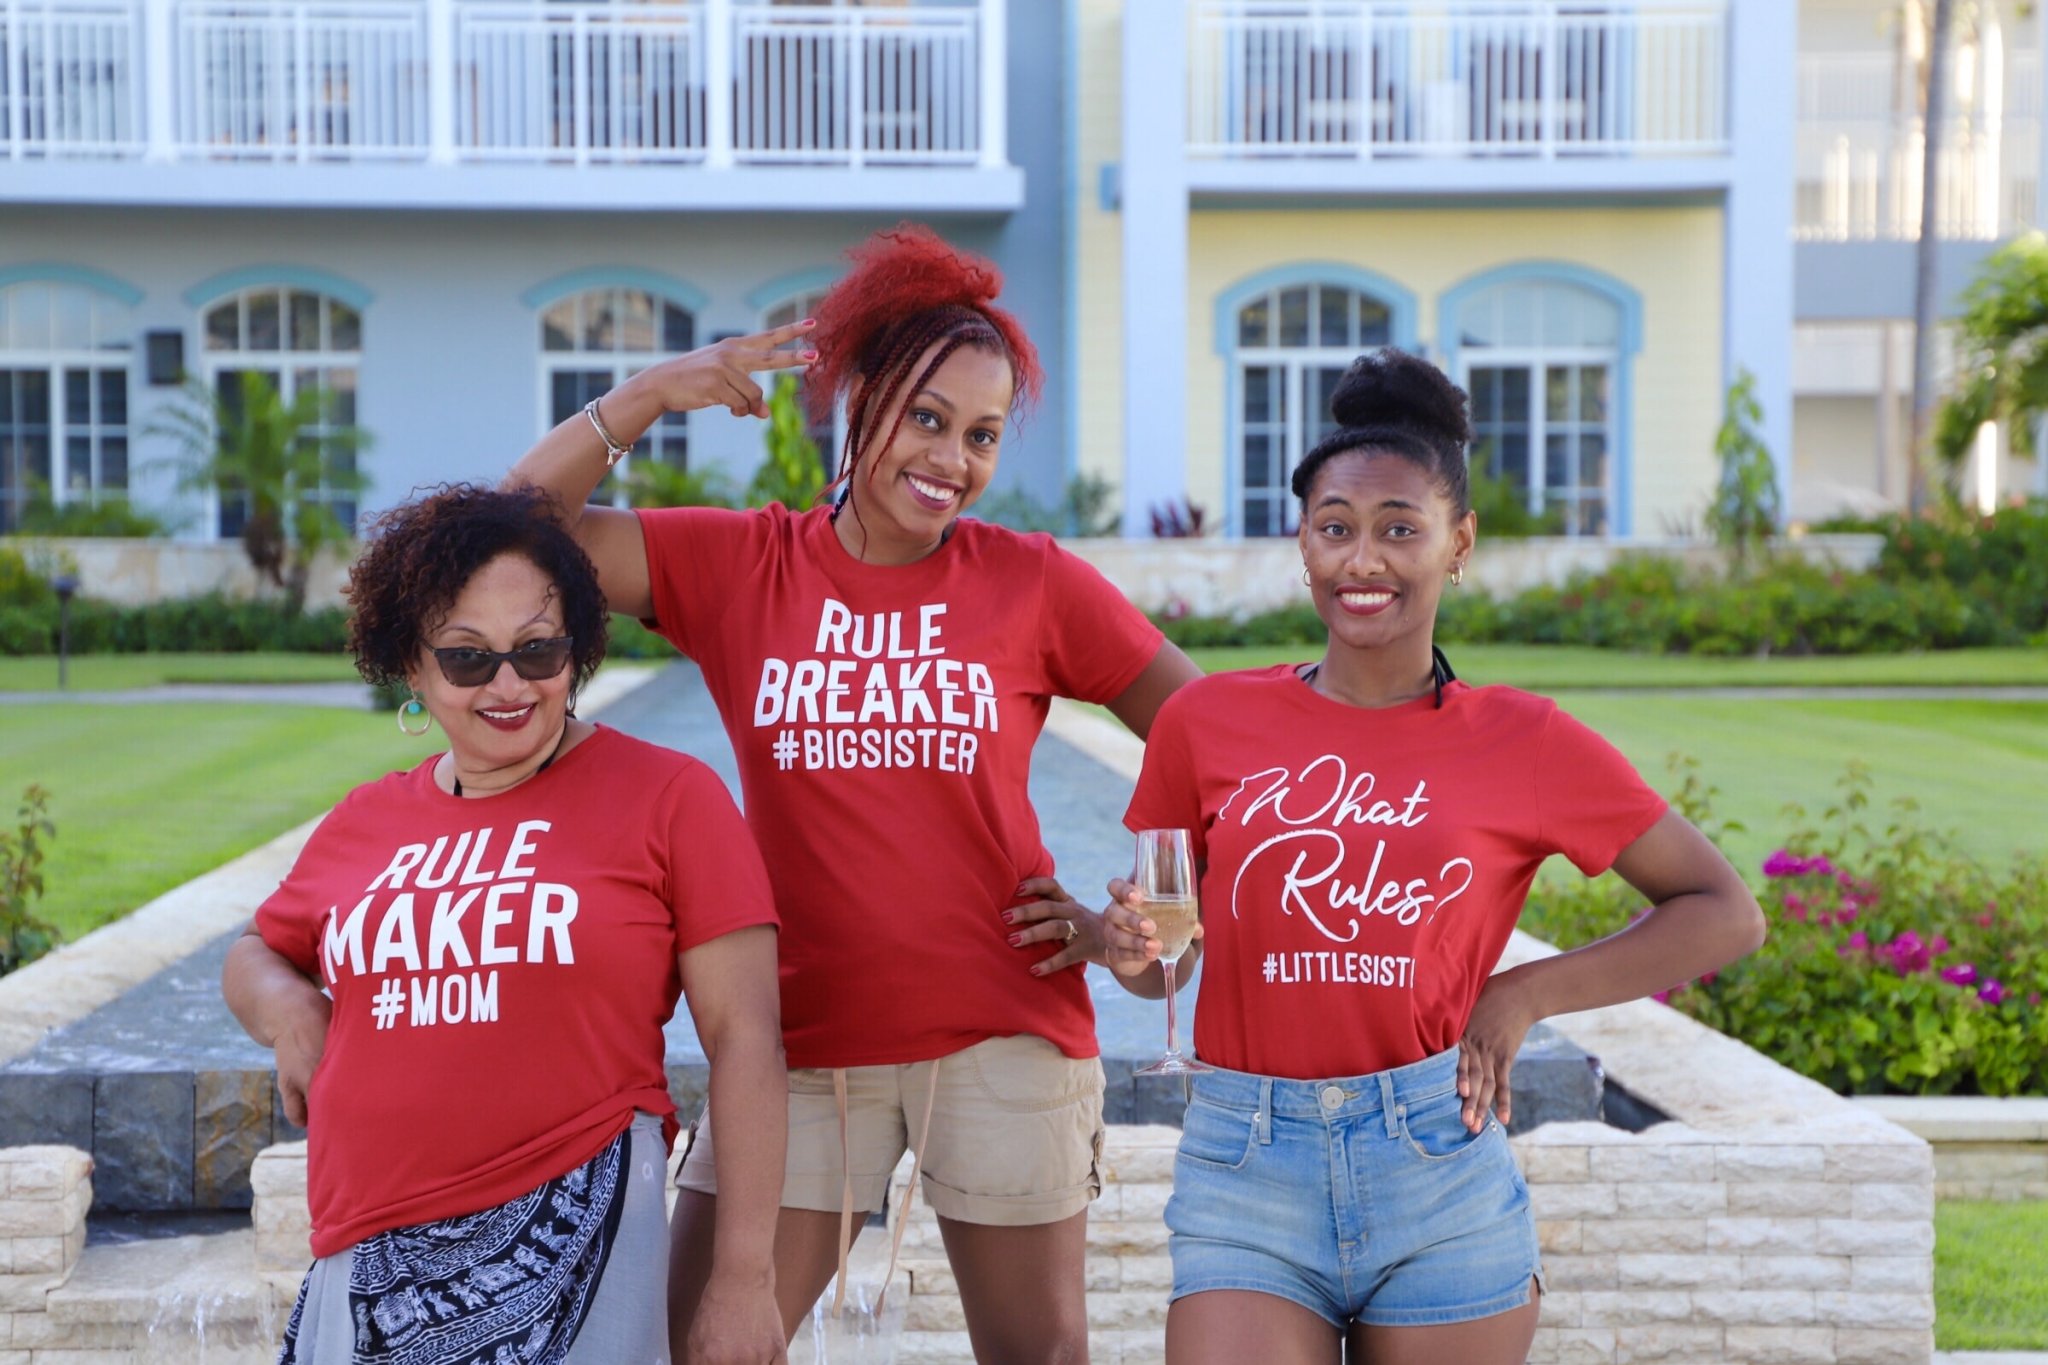 A Baby Boomer, Gen Xer and a Millennial walk into a bar...Hilarity Ensues | Multi-Generational Travel at Beaches Turks and Caicos